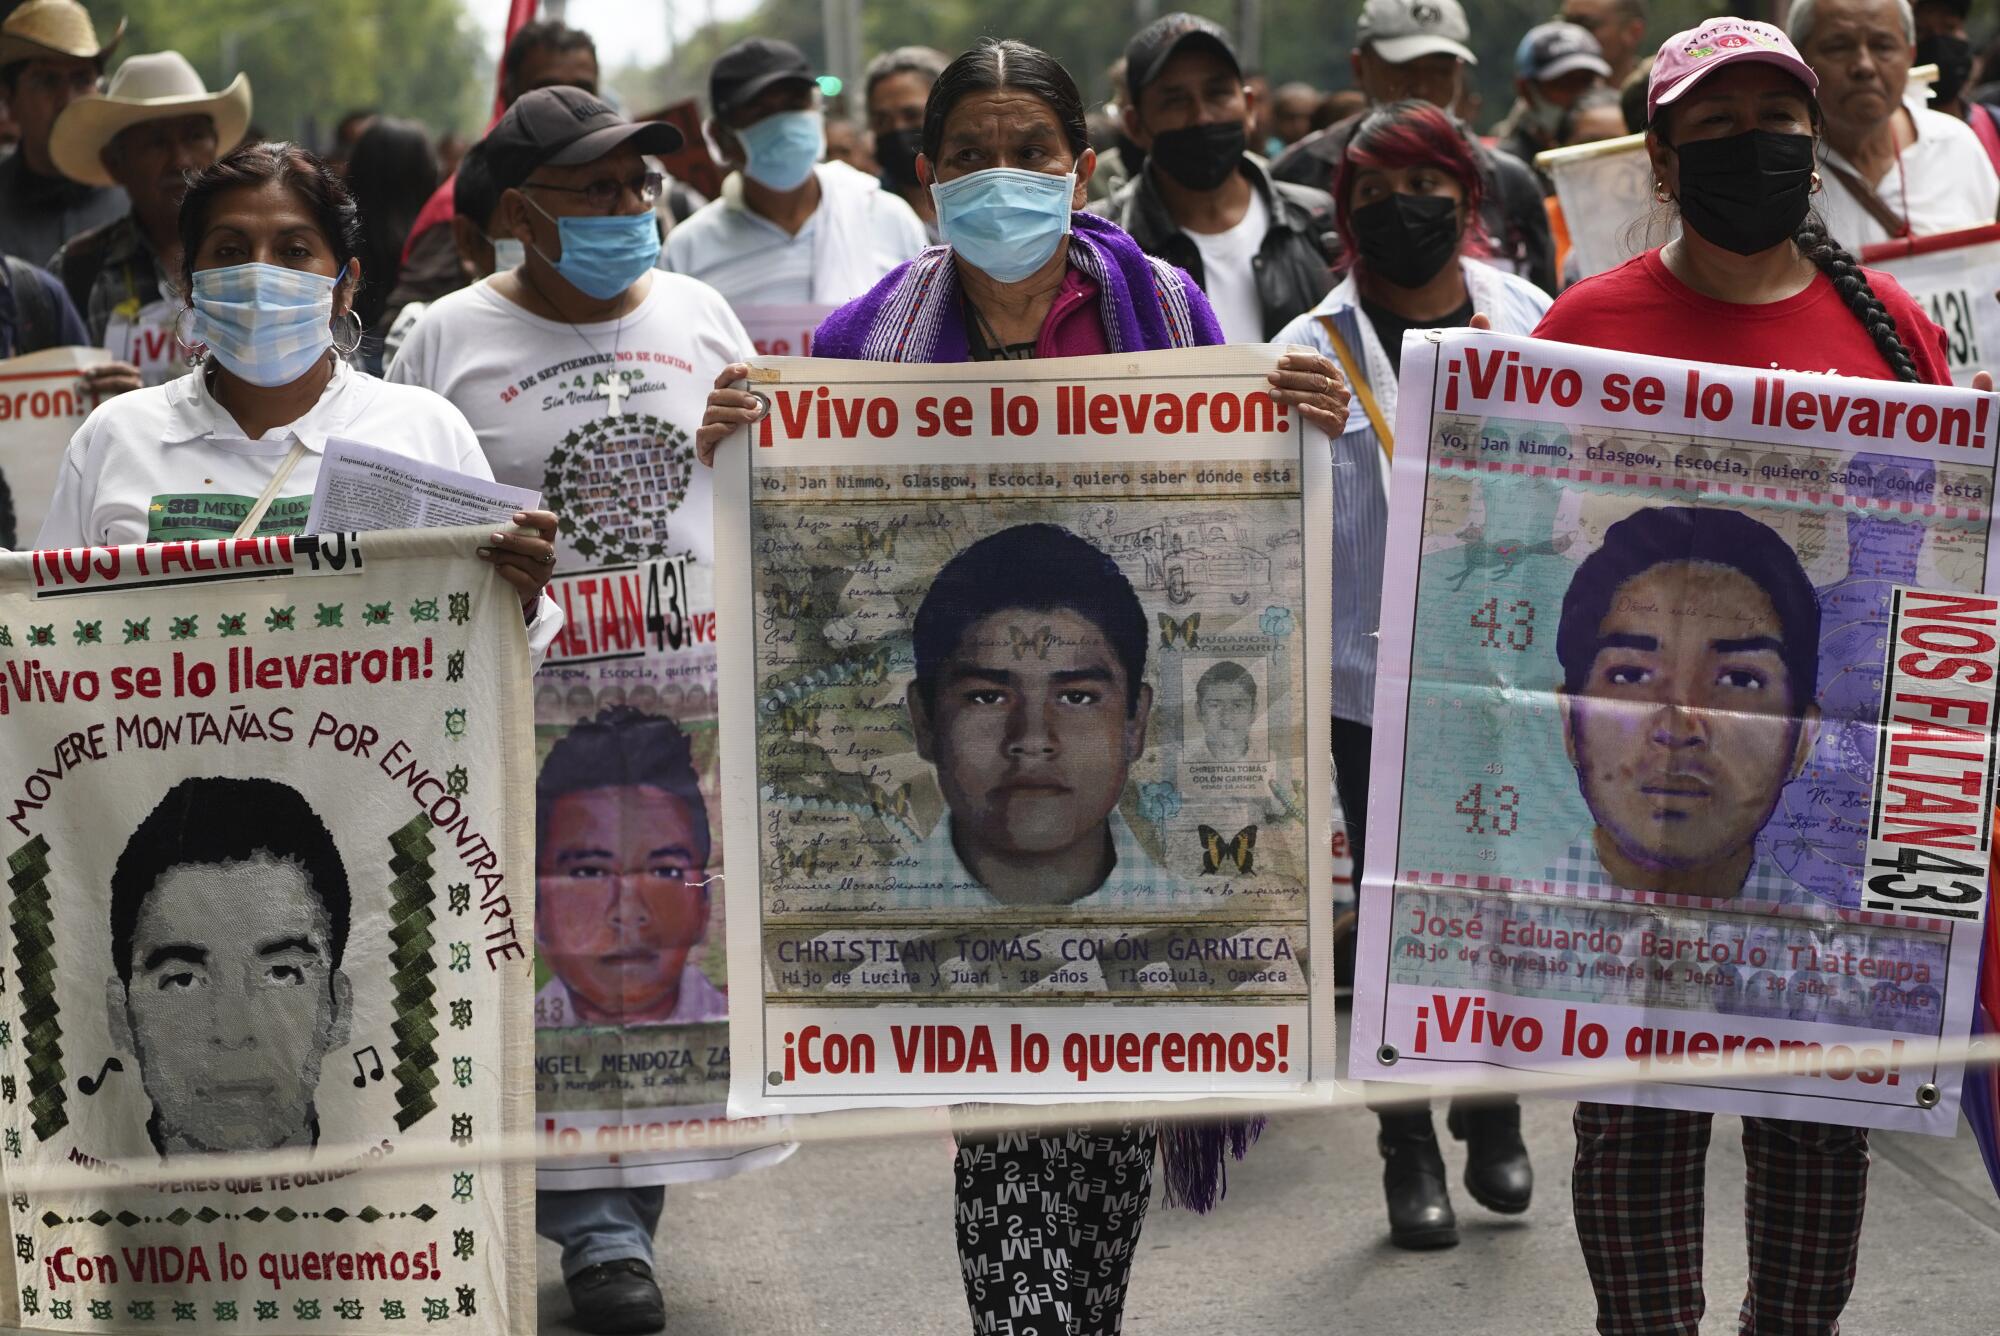 People wearing masks march while holding signs with images of individual men.